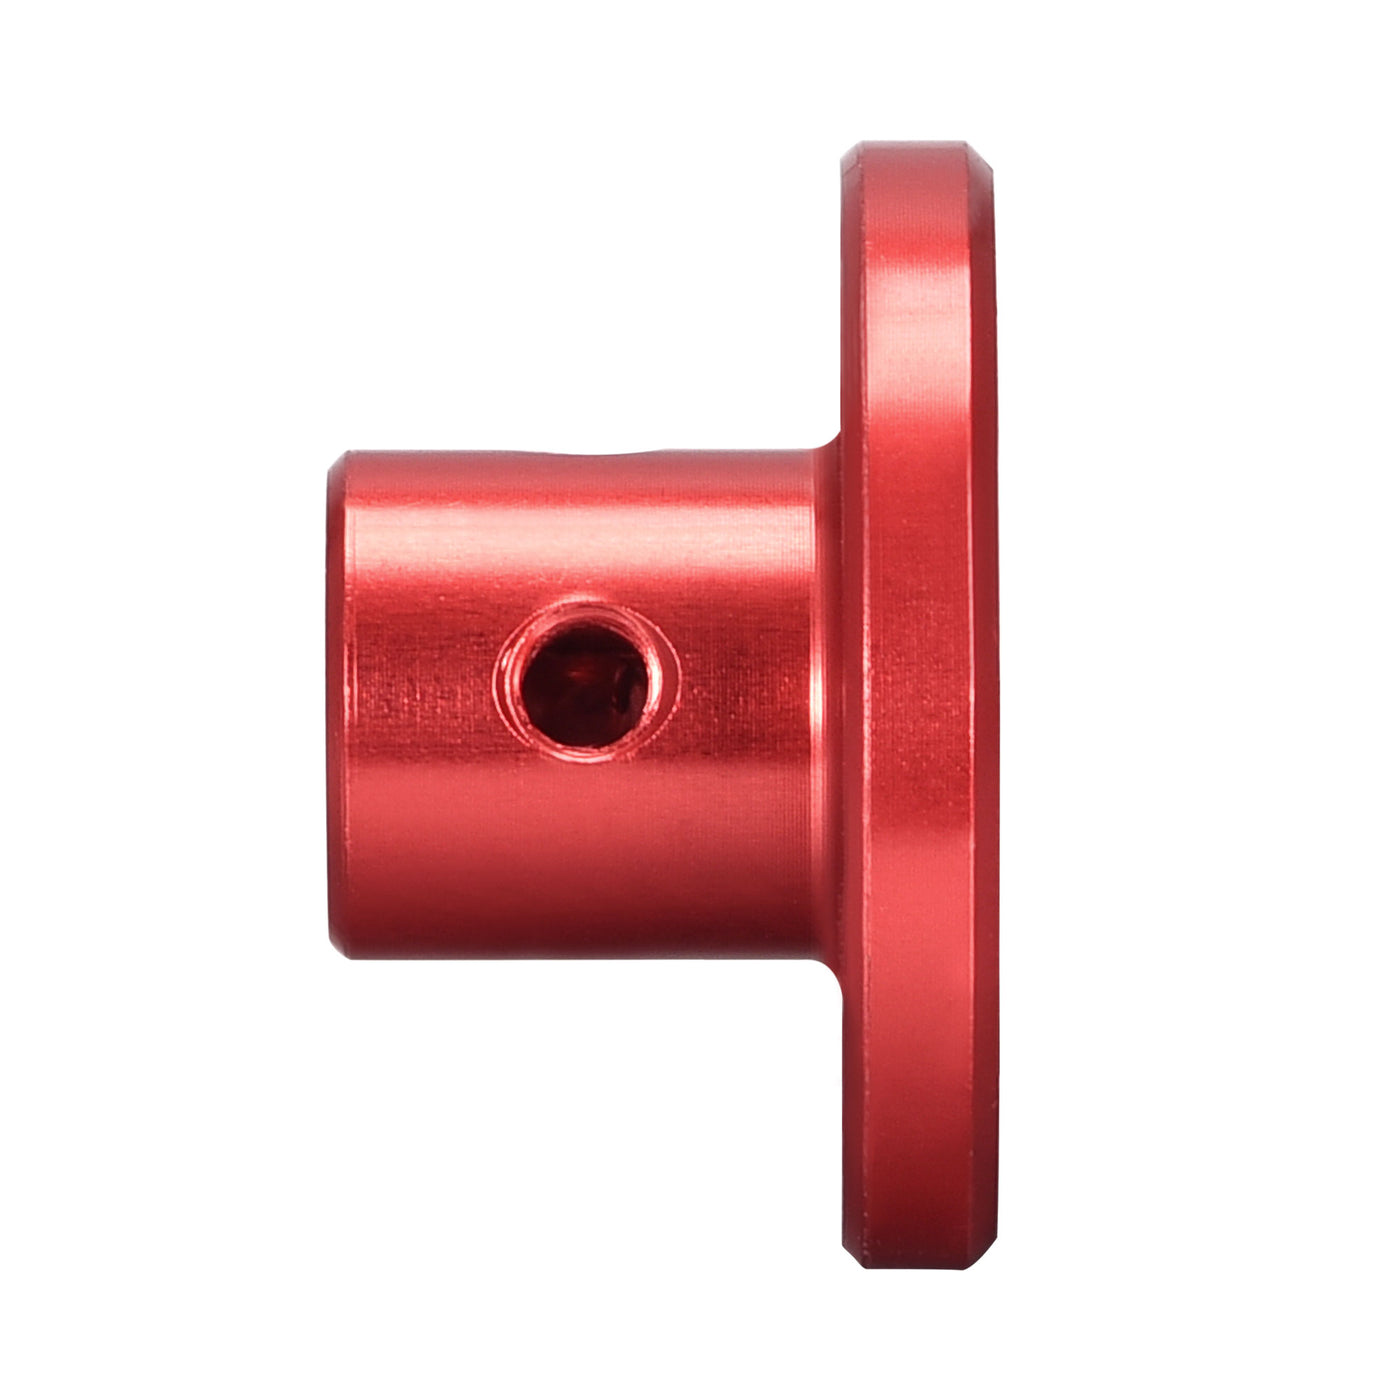 Uxcell Uxcell 3mm Dia H13xD10 Rigid Flange Coupling Motor Shaft Coupler DIY Red 2pcs